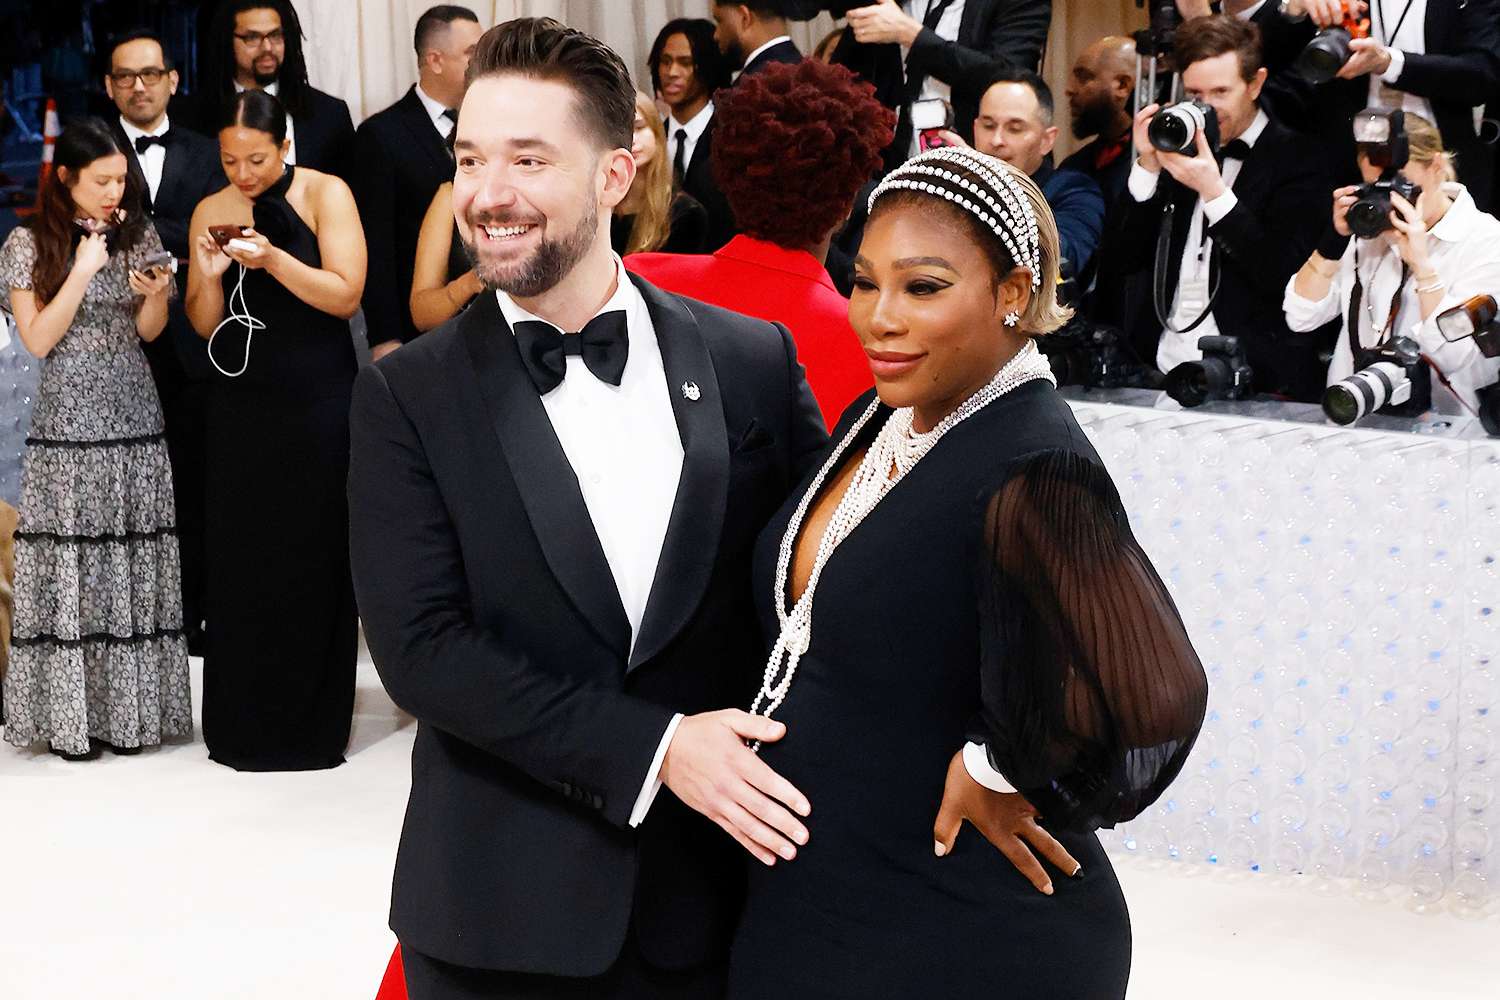 Serena Williams and Alexis Ohanian attend the 2023 Costume Institute Benefit celebrating "Karl Lagerfeld: A Line of Beauty" at Metropolitan Museum of Art on May 01, 2023 in New York City.